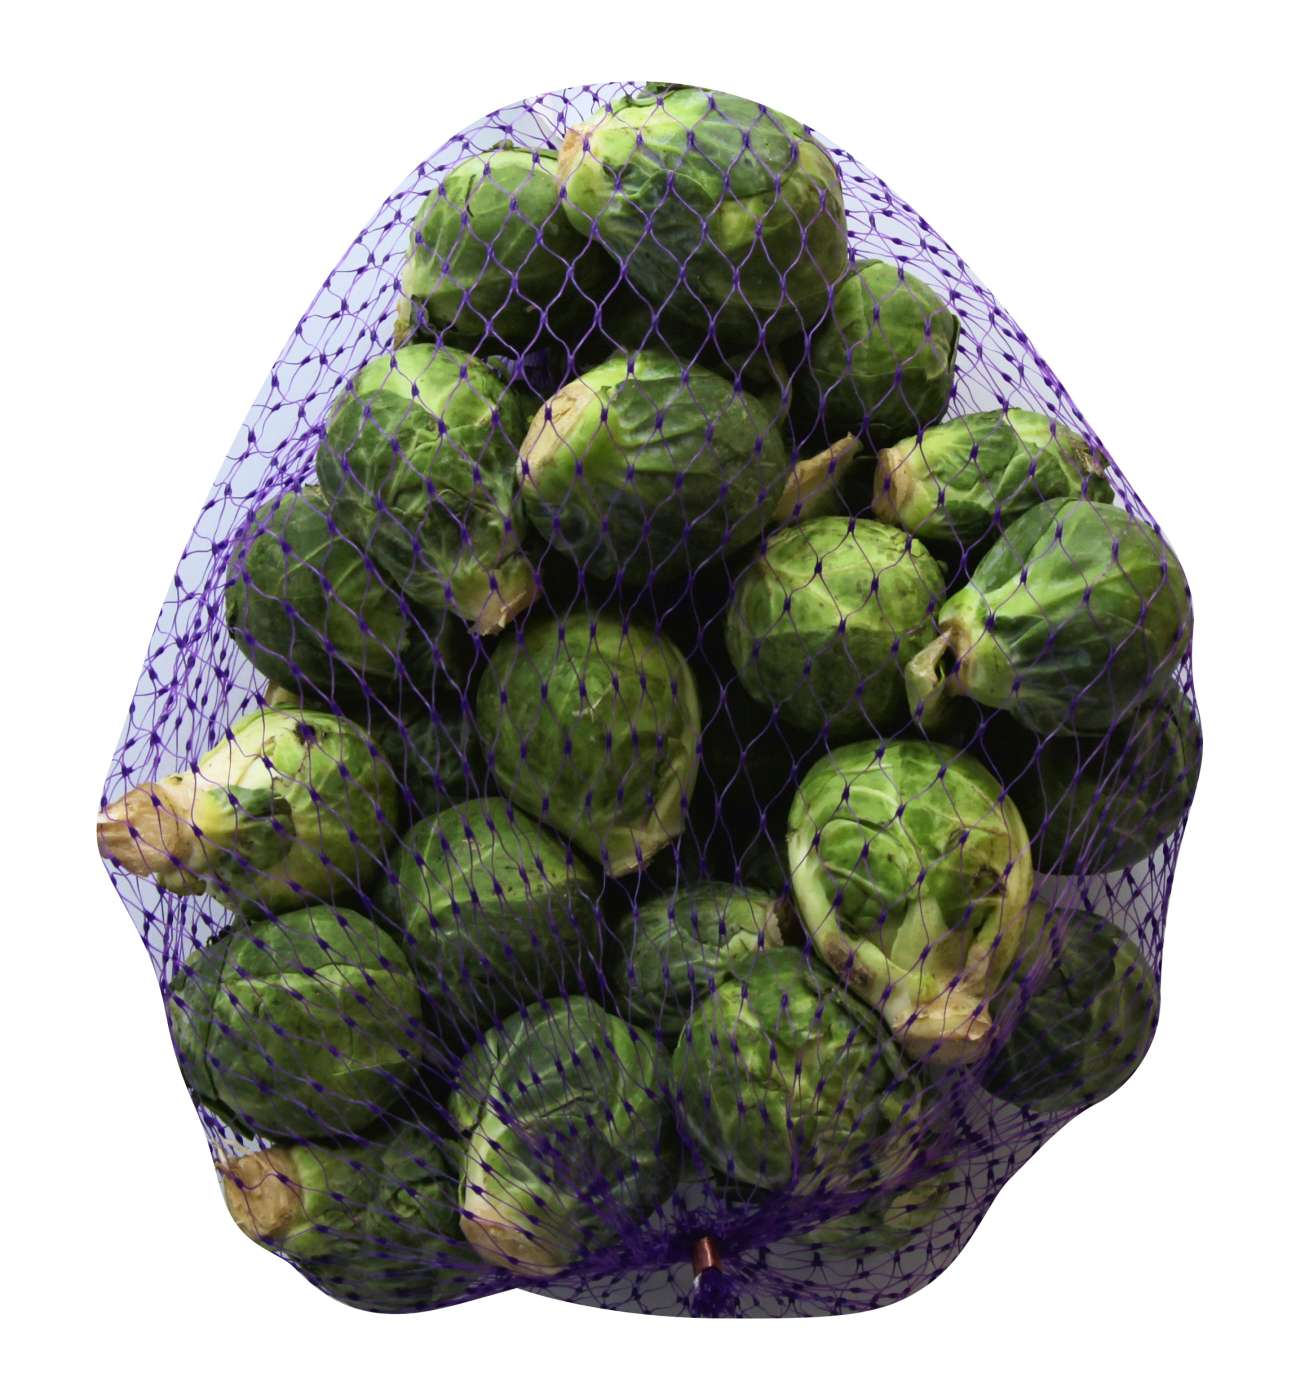 Fresh Brussels Sprouts; image 2 of 5